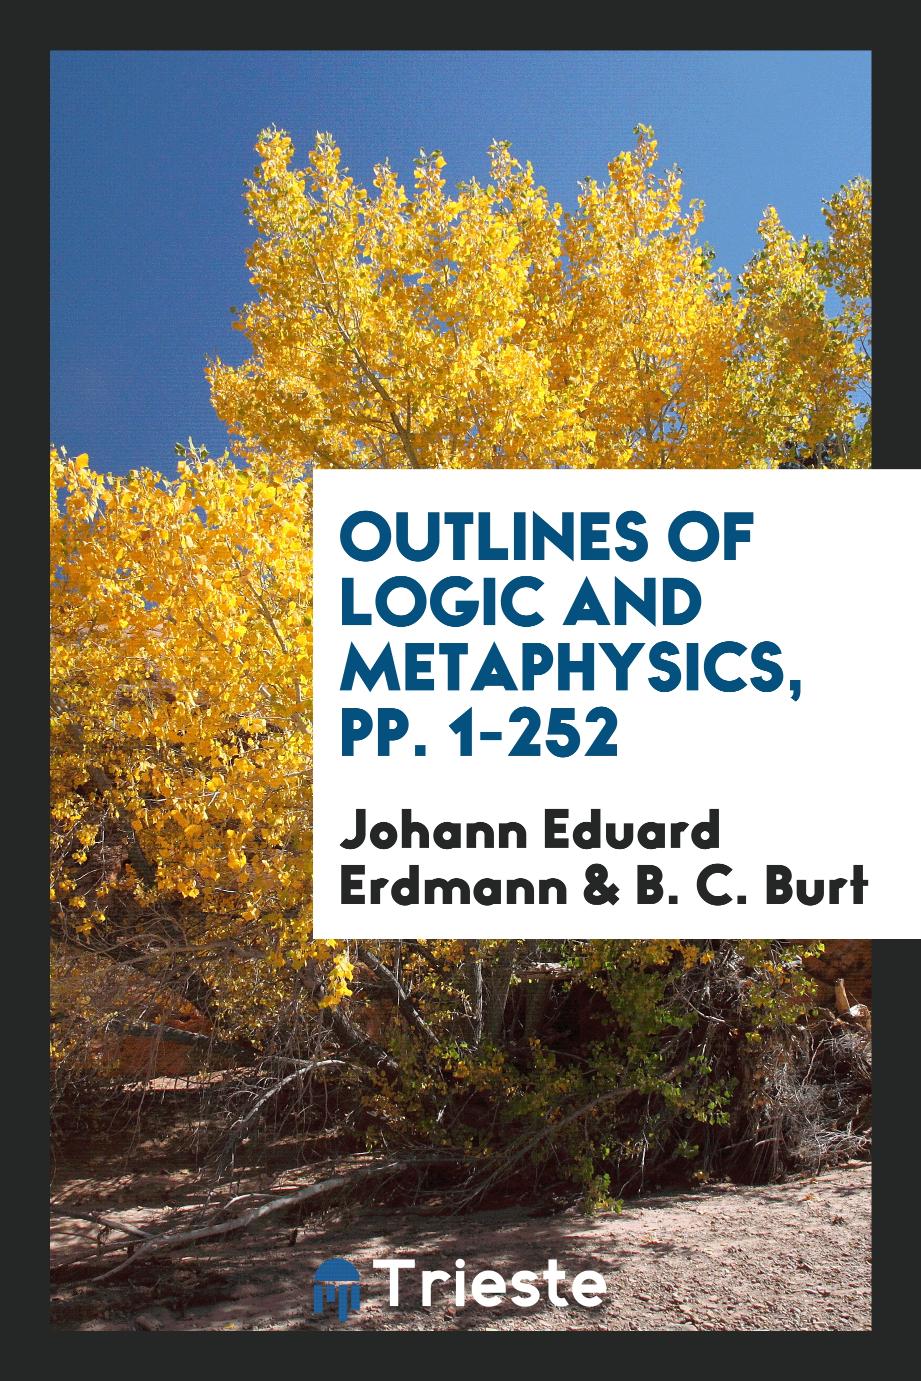 Outlines of Logic and Metaphysics, pp. 1-252